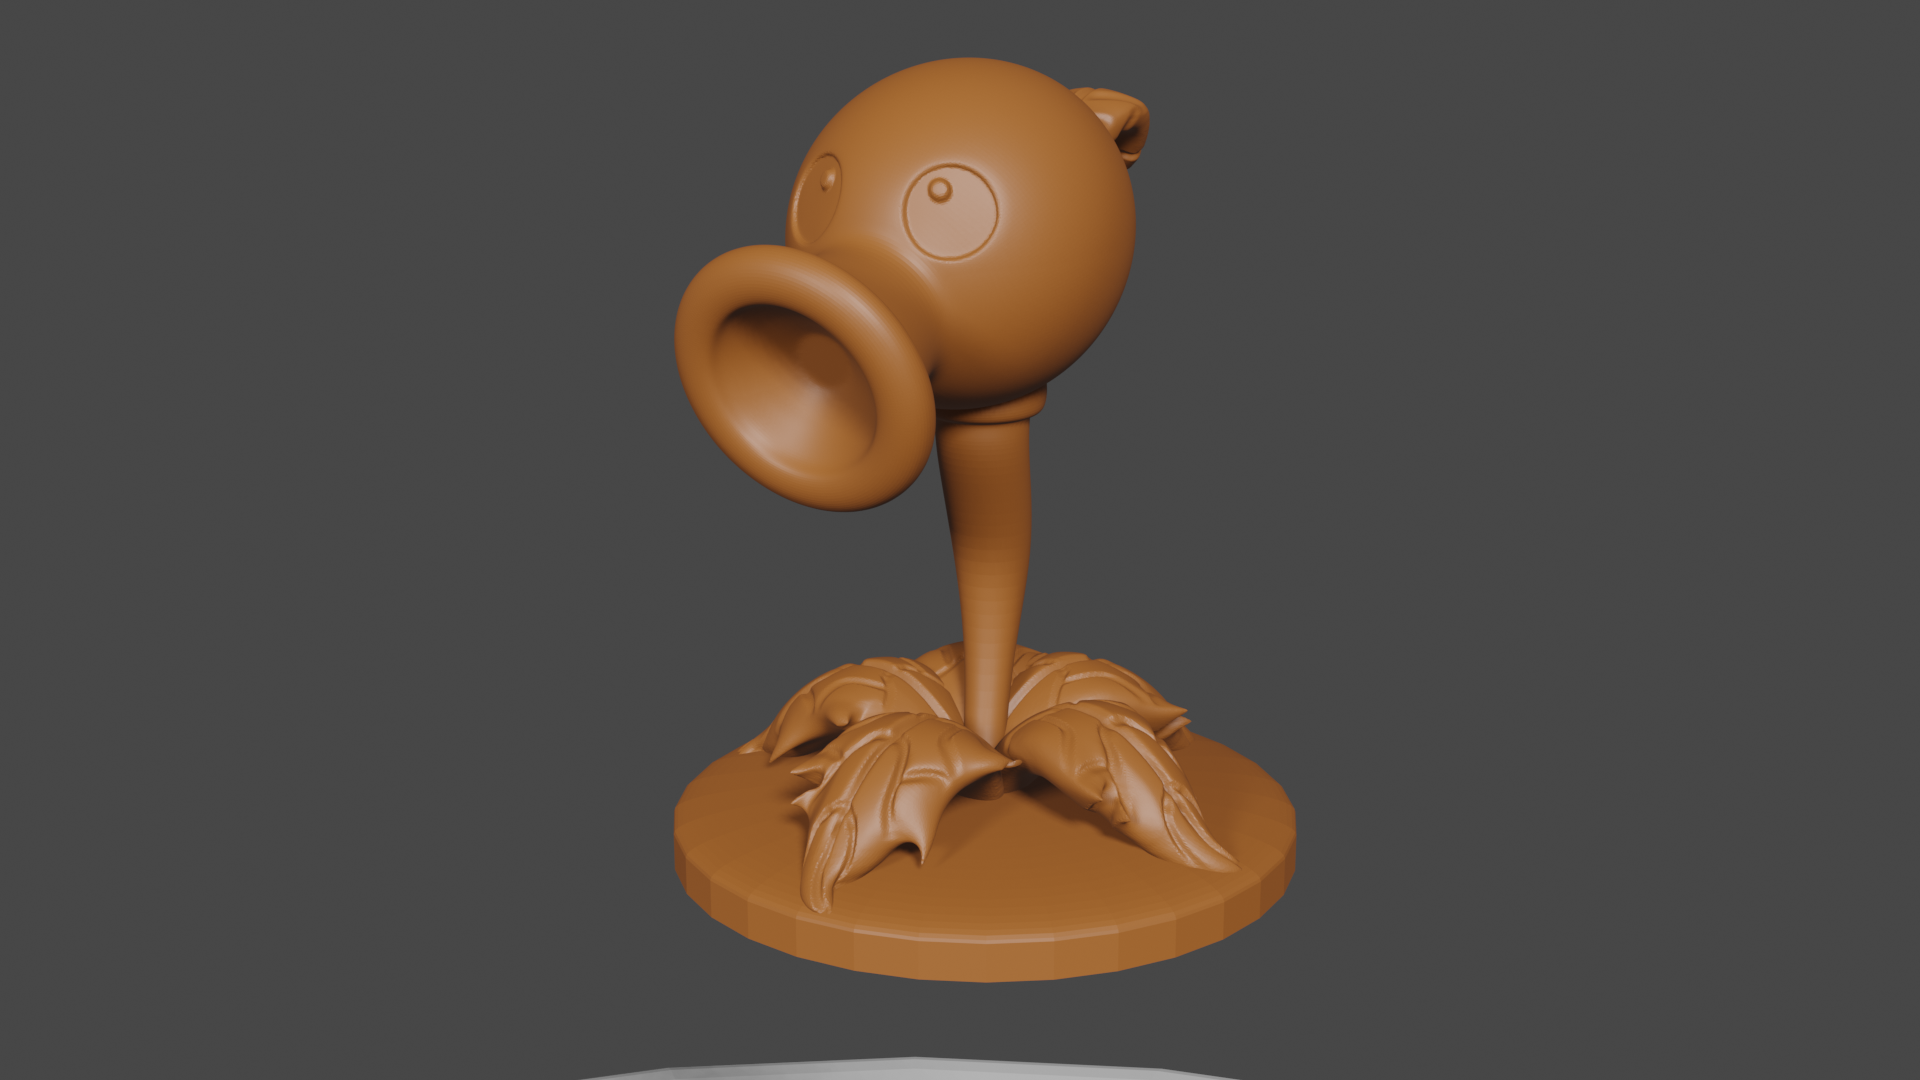 Plants Vs Zombies Inspired Peashooter Tabletop Dnd Miniature By Pixelchroniclesminiatures